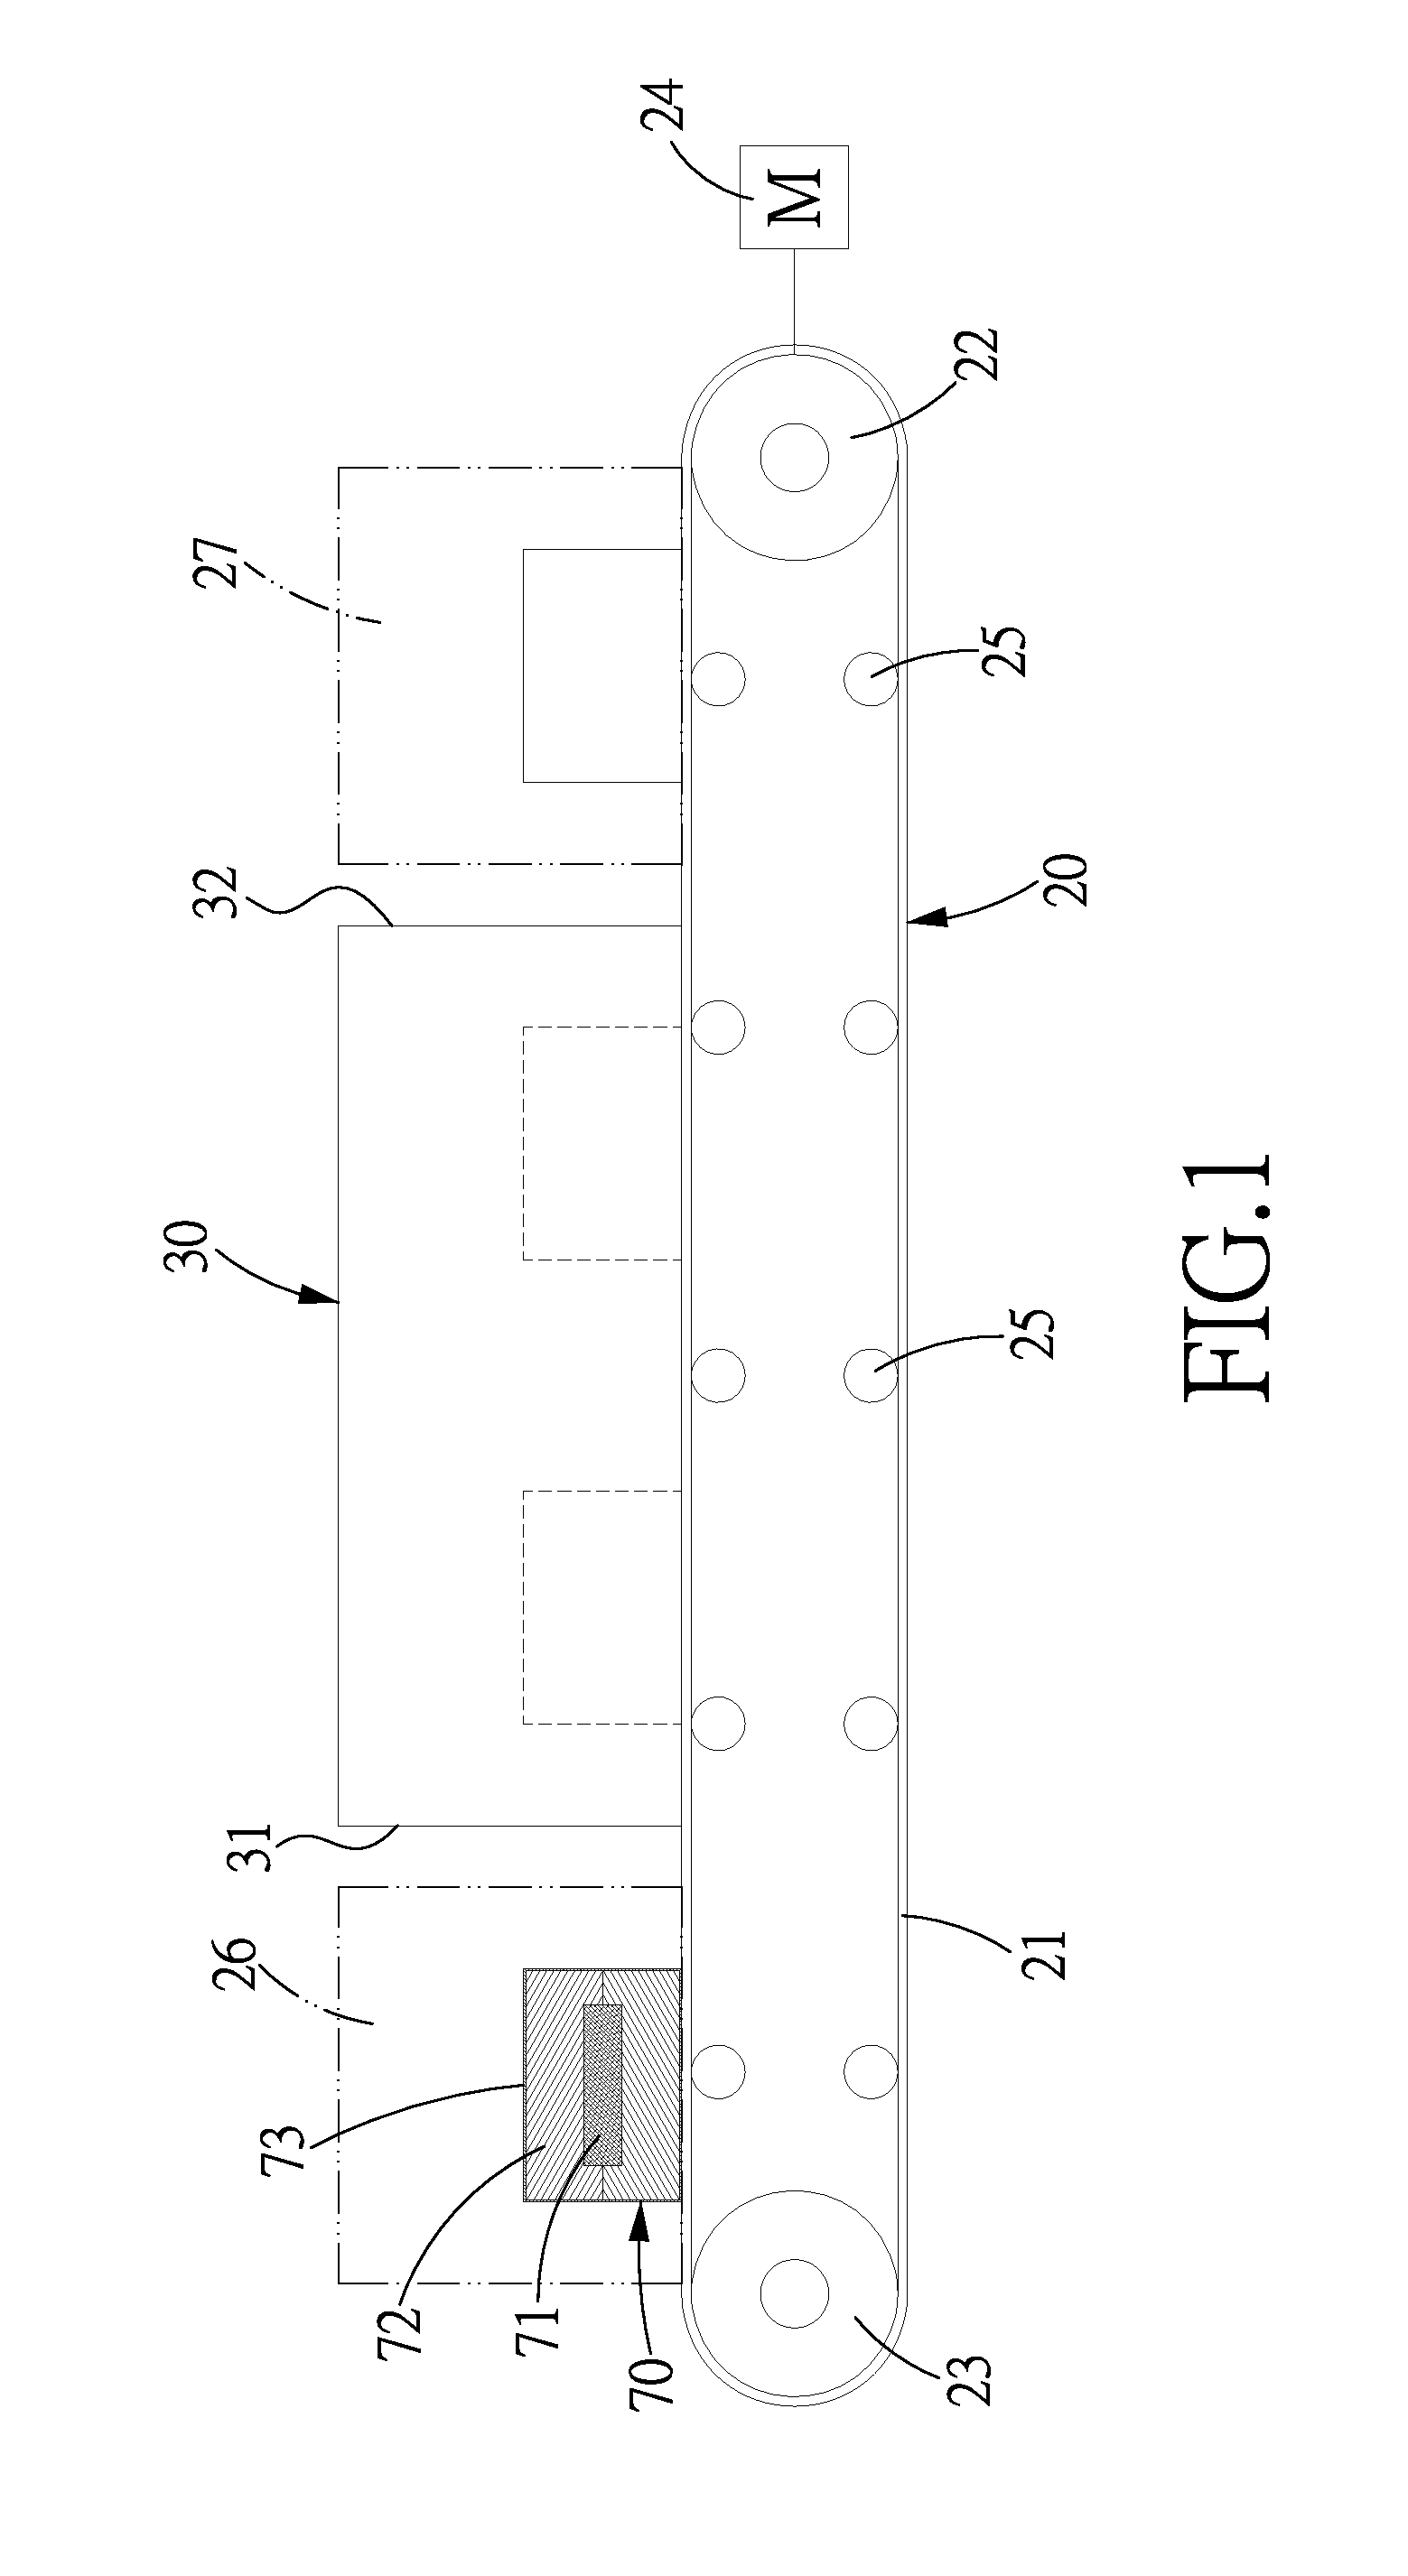 Fiber composite material microwave curing device with an endless conveyor belt and a method for curing composite material using the microwave curing device